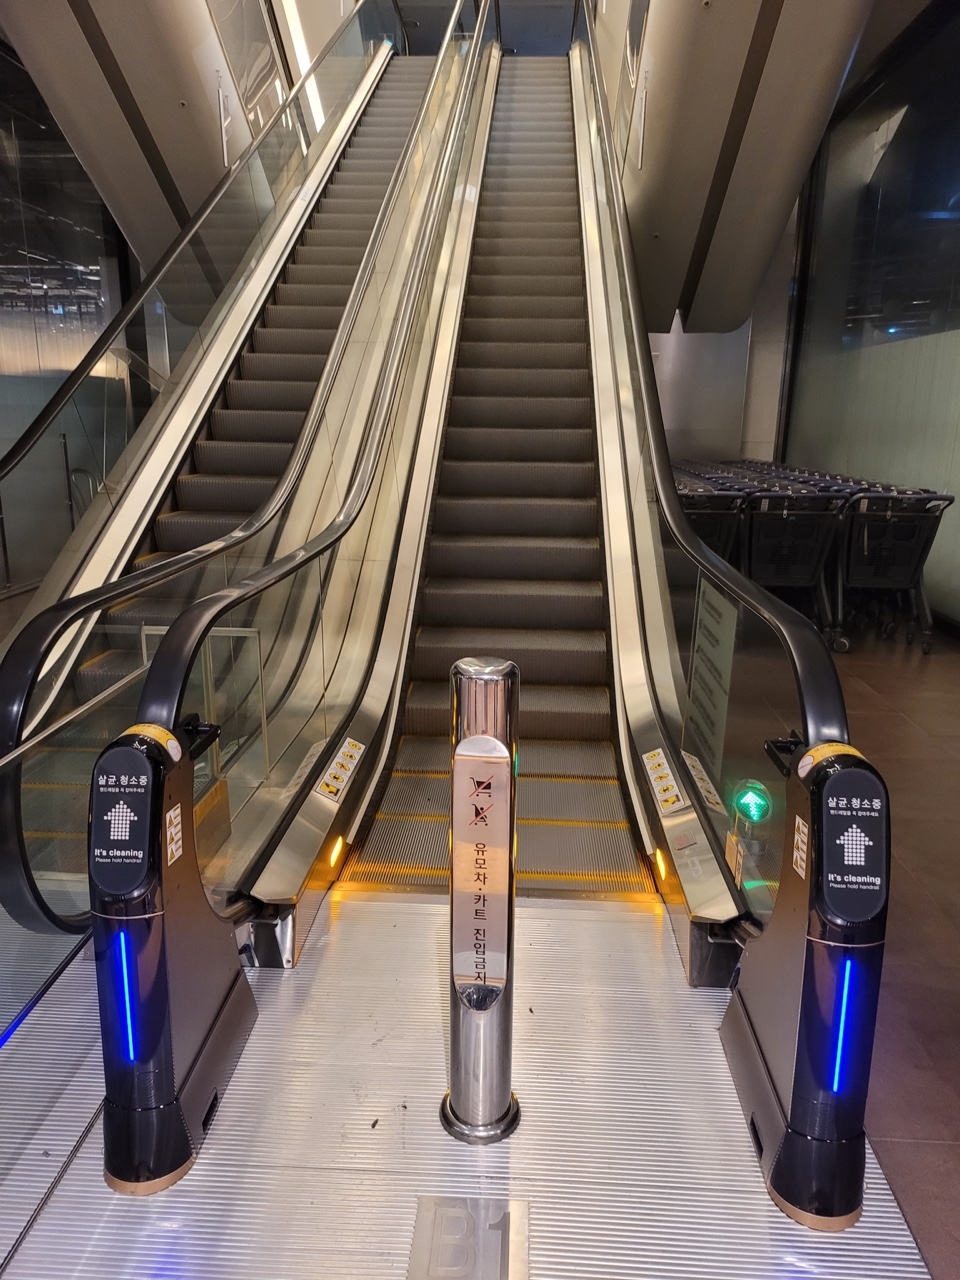 Shinsegae Department Store with WeClean, an escalator handrail sterilization, disinfection cleaner, 4